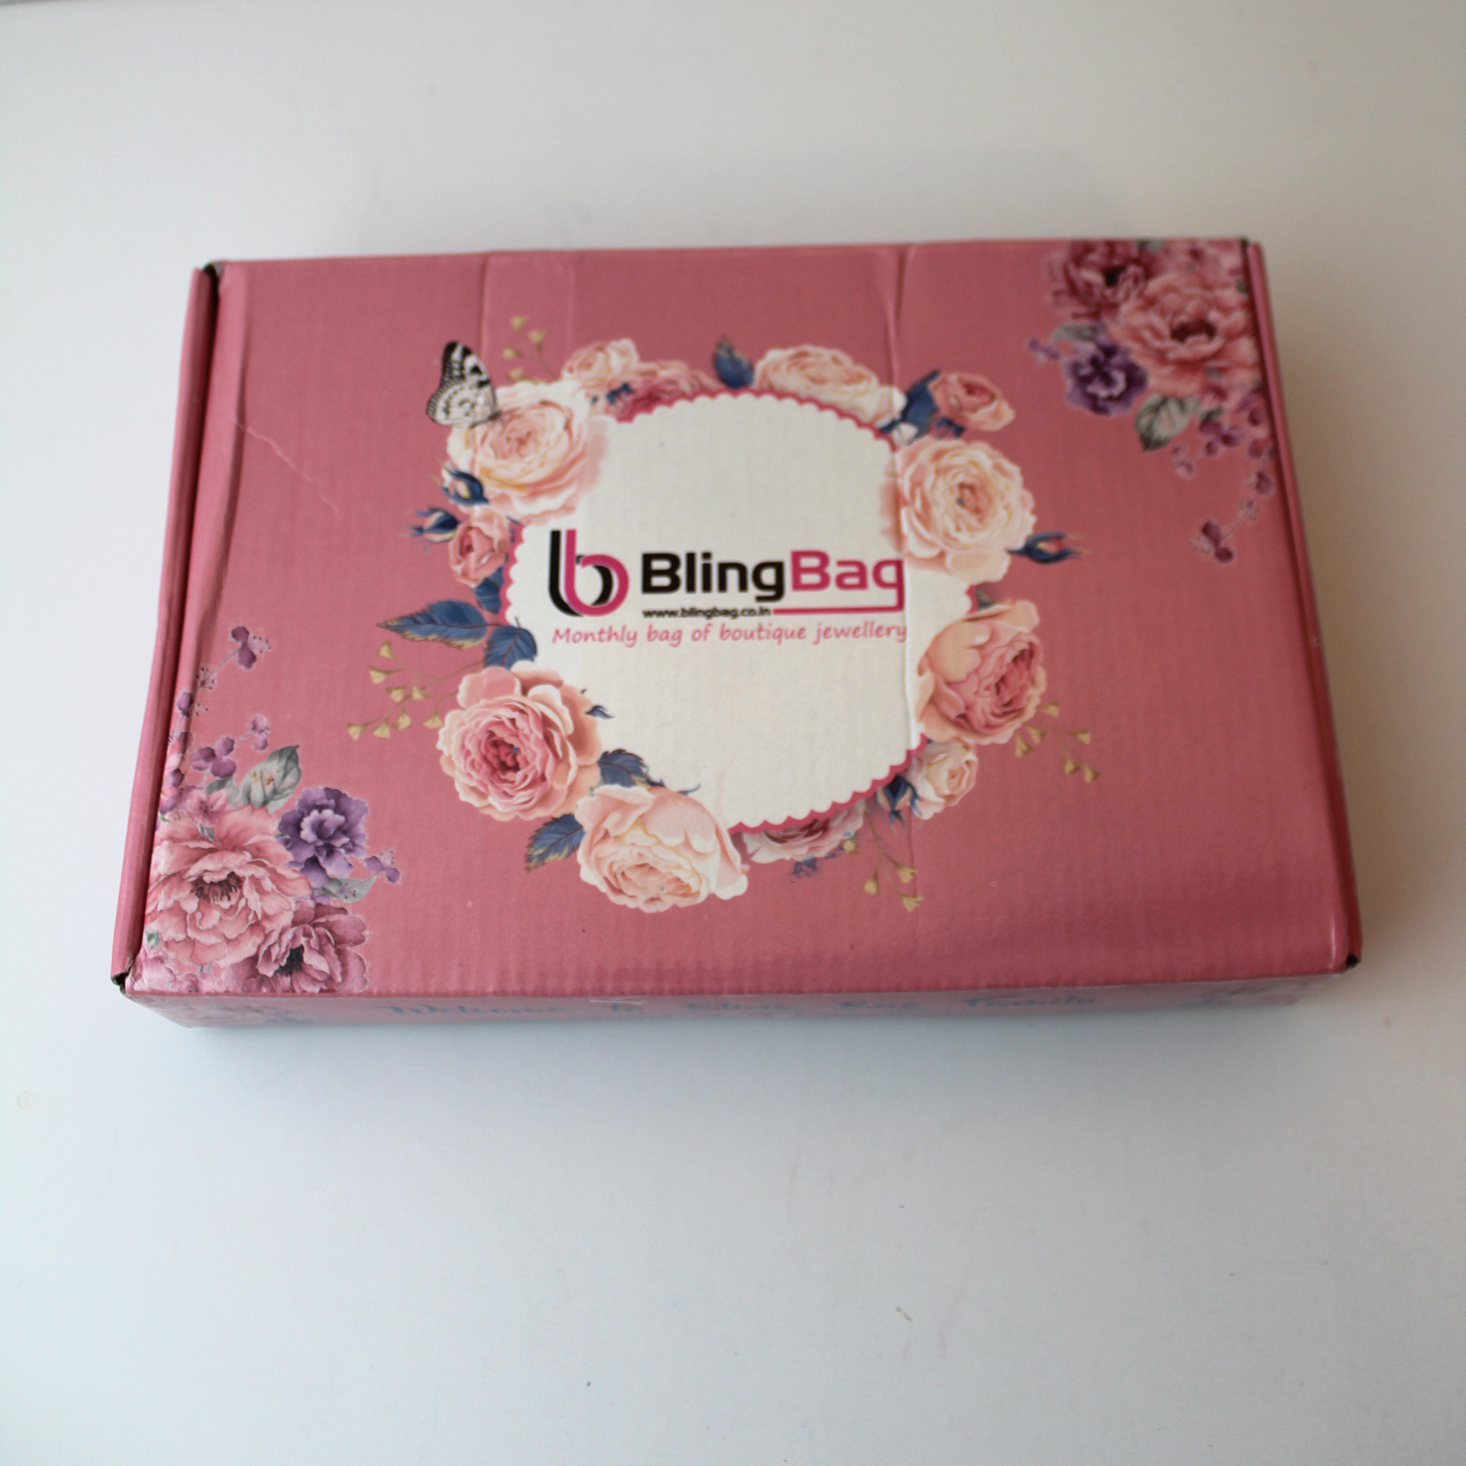 Bling Bag Jewelry Subscription Review – November 2018